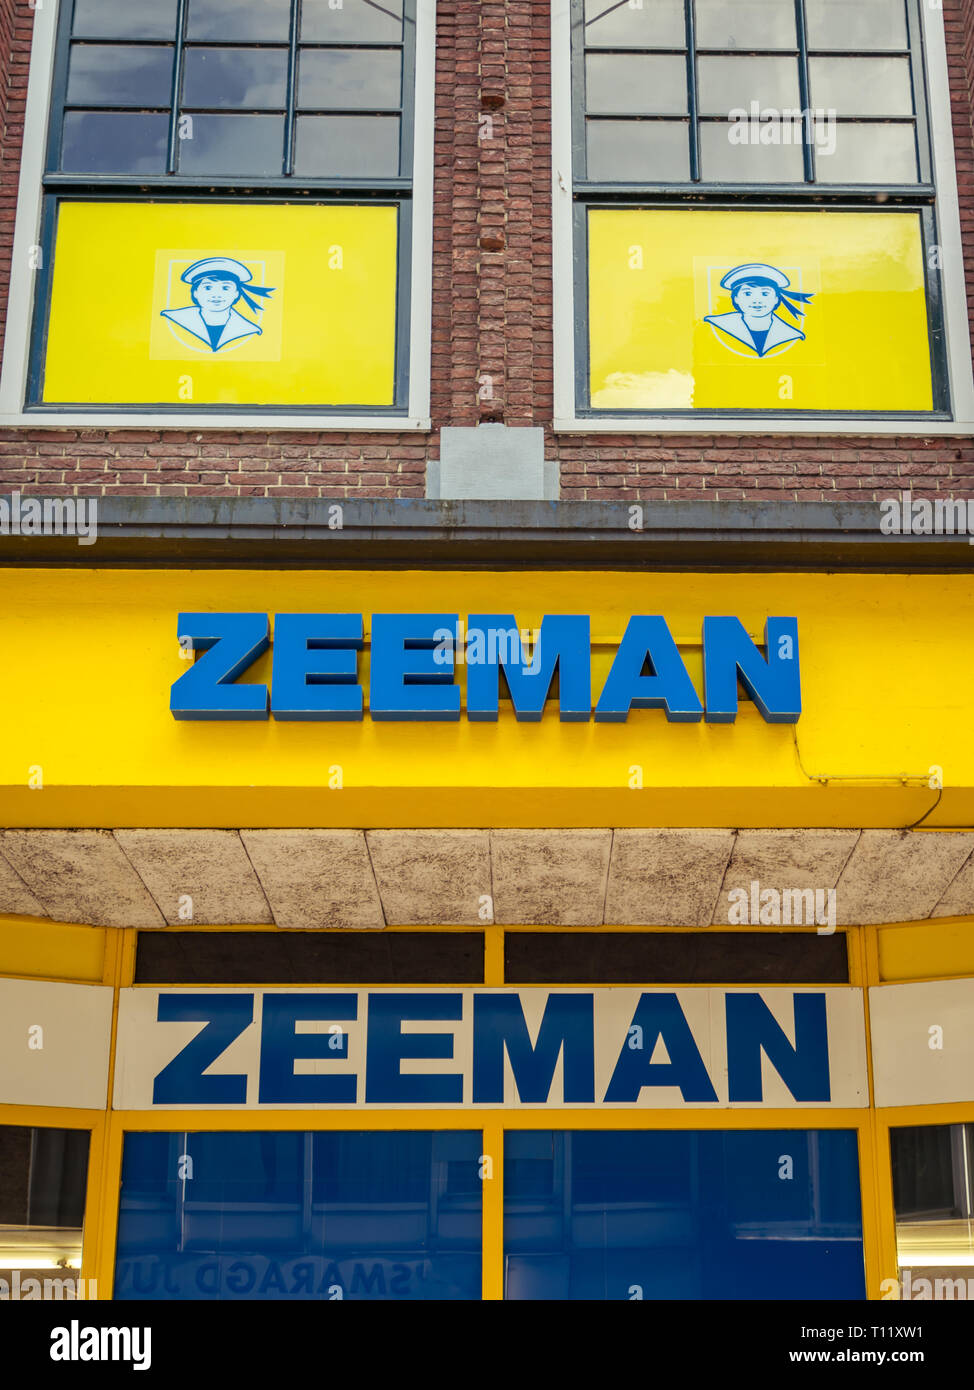 Dordrecht, The Netherlands - March 03, 2019: Close up of the Zeeman logo on  a storefront. Zeeman Textile Supers is a Dutch retail chain with 1,250 sto  Stock Photo - Alamy